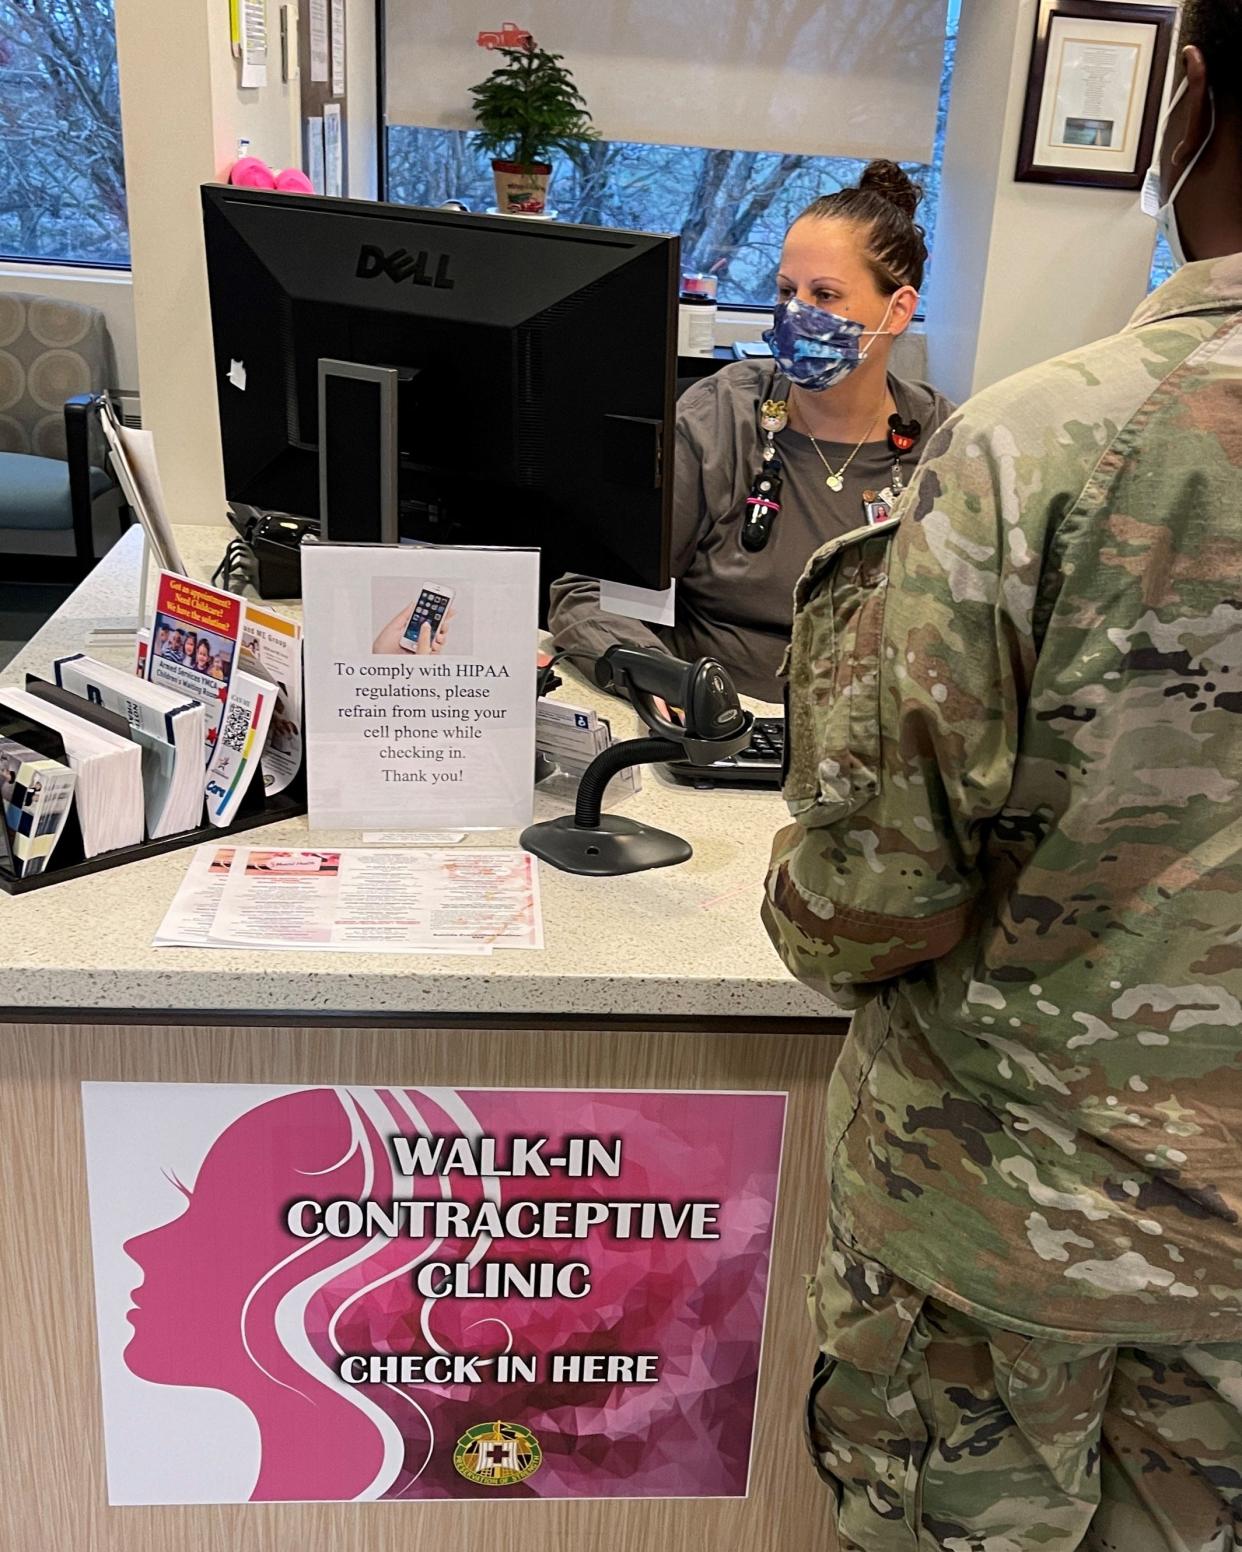 Blanchfield Army Community Hospital employee, Michele Willis, checks a soldier in for the Fort Campbell hospital’s weekly walk-in contraceptive clinic on Fort Campbell on Jan. 11. Services include contraception counseling, initial prescription or prescription refill, and IUD or implant placement or removal.